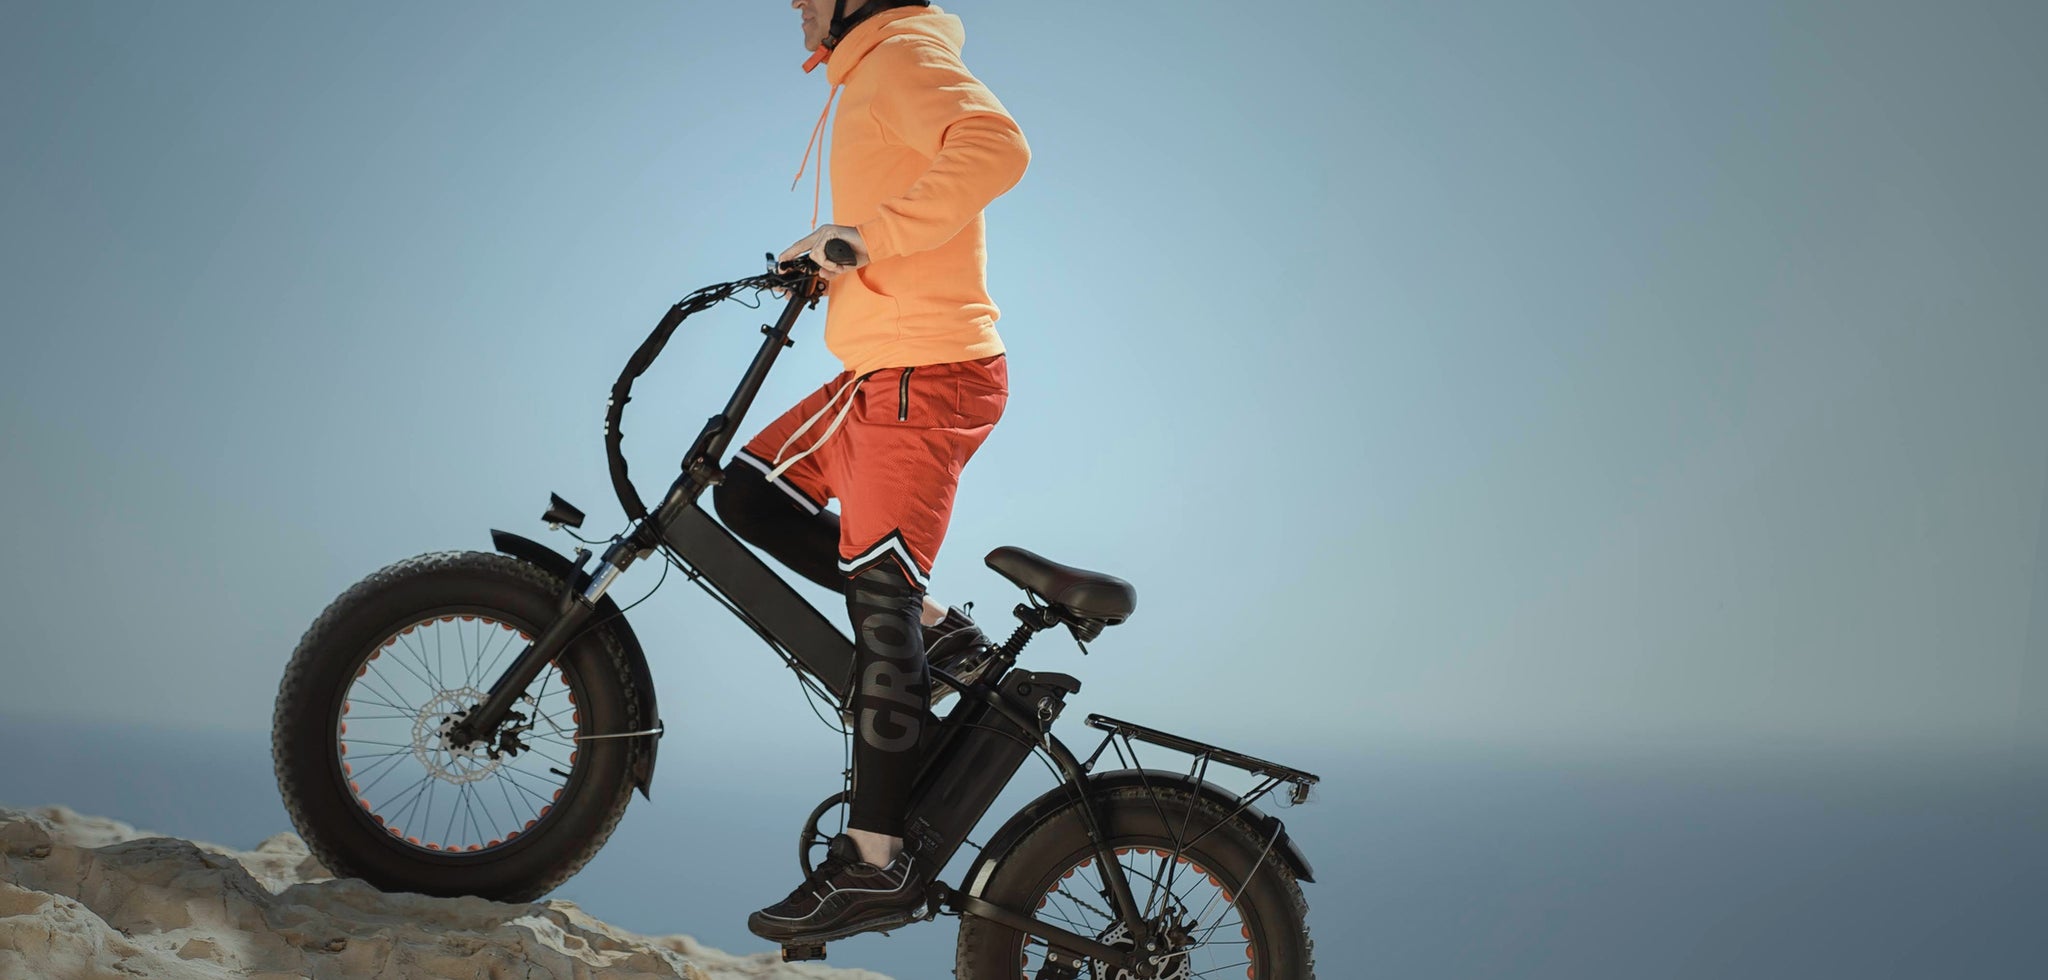 Do Riding eBikes Help You Lose Weight?